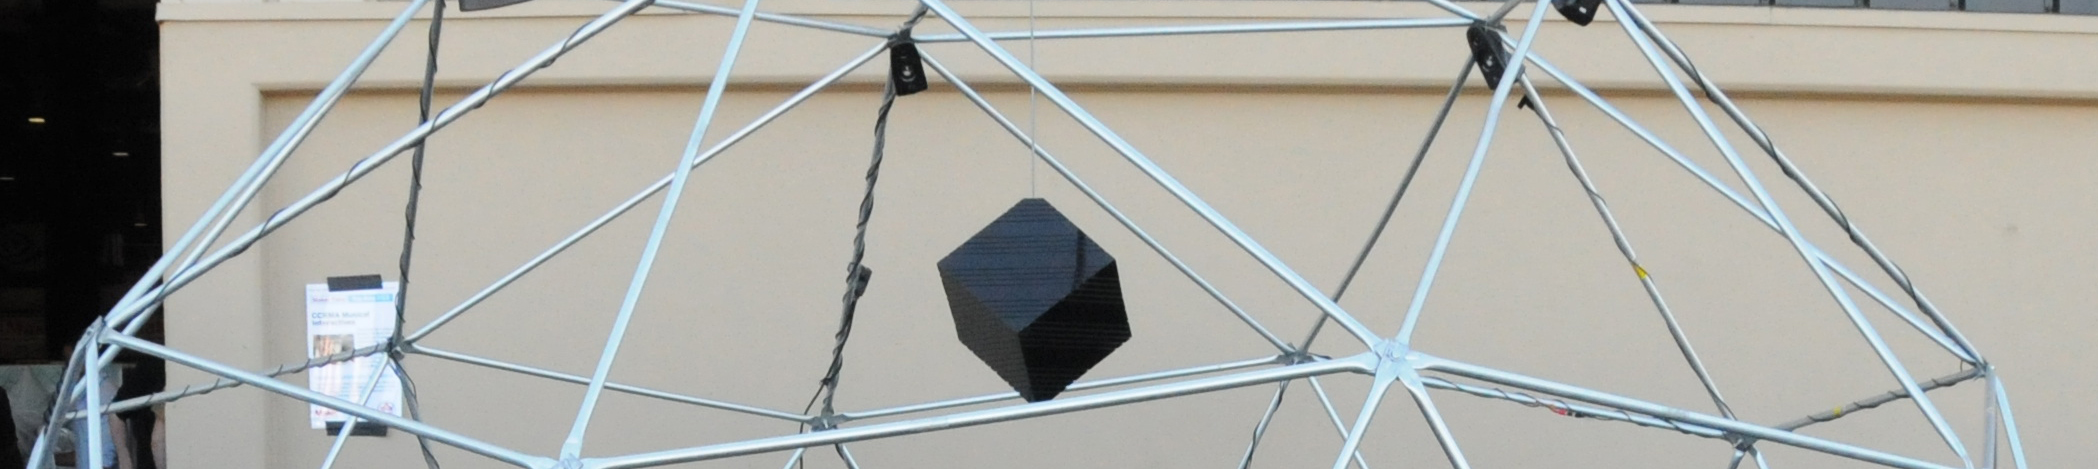 The Black box being shown at SF MakerFaire 2013